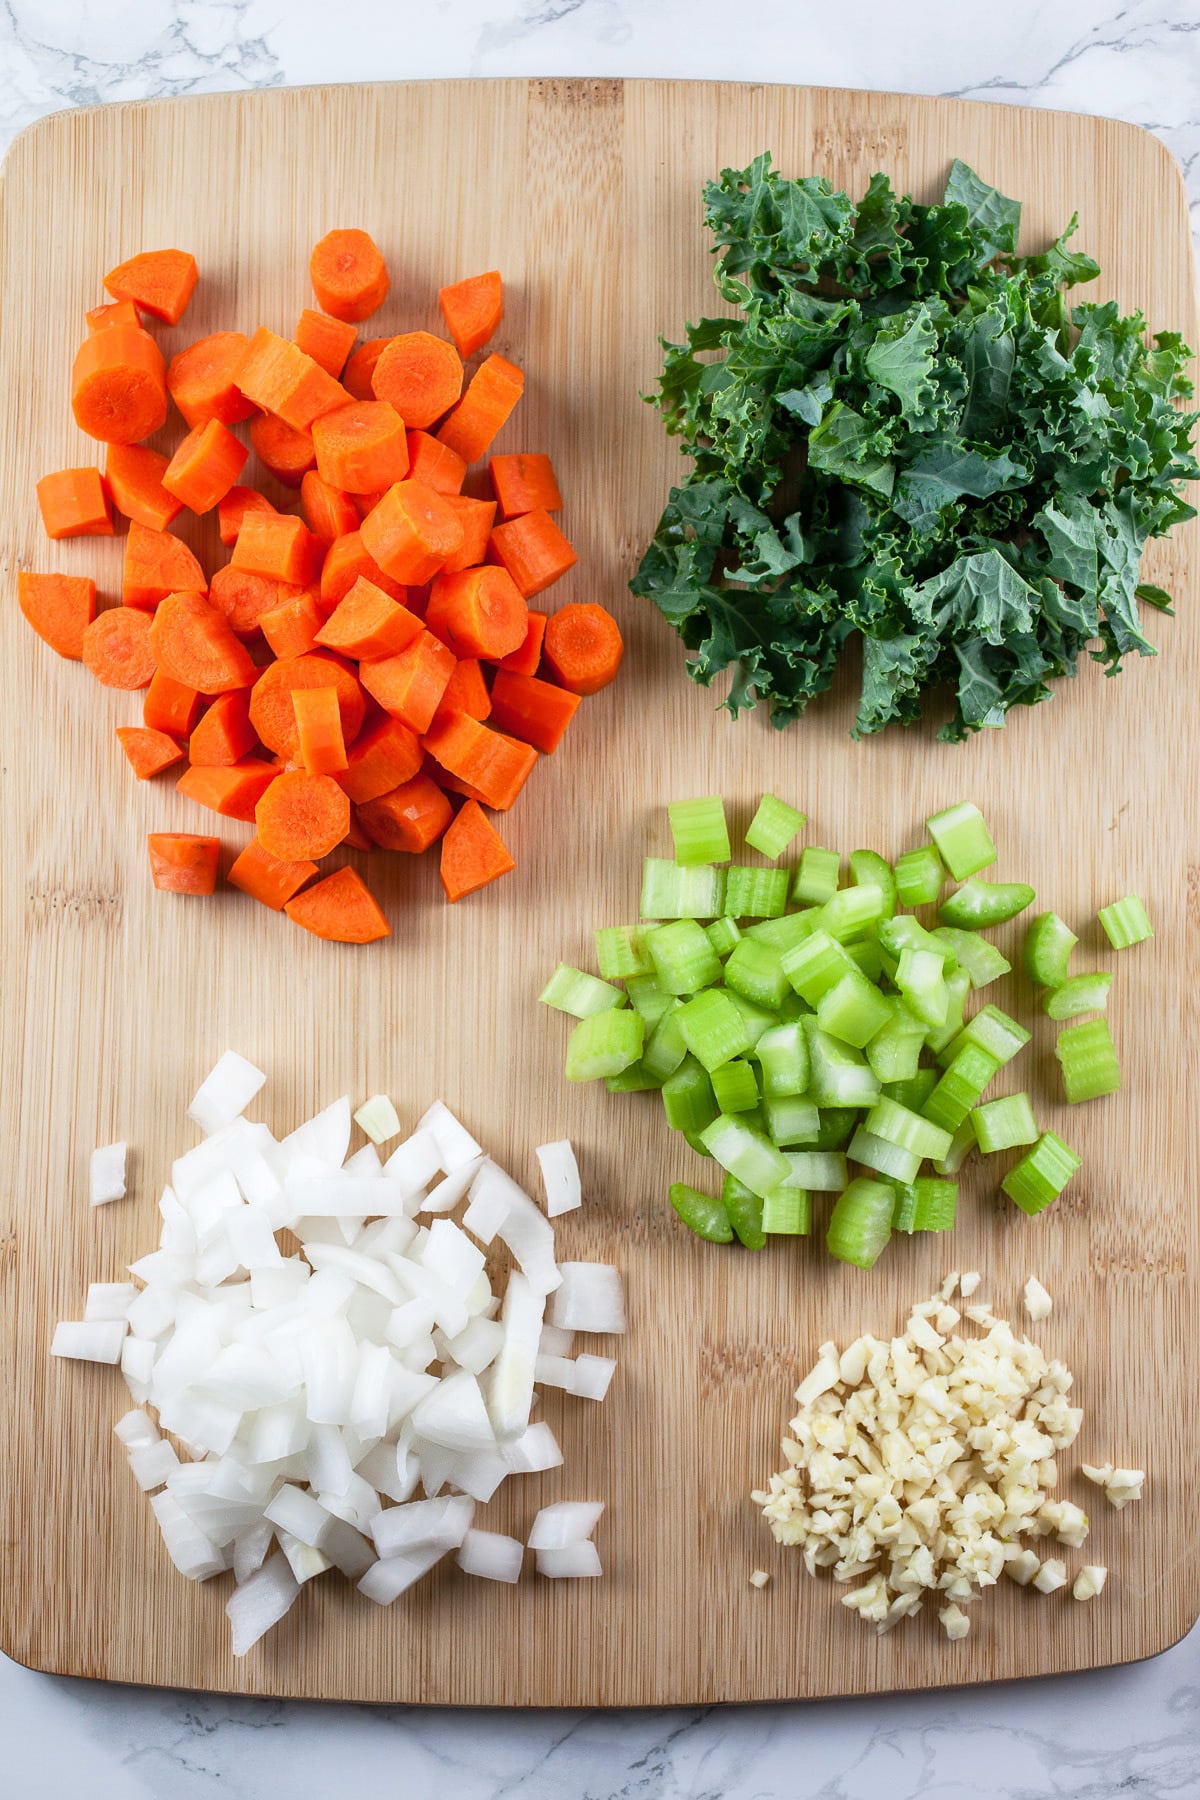 Minced garlic, onions, celery, carrots, and chopped kale on wooden cutting board.